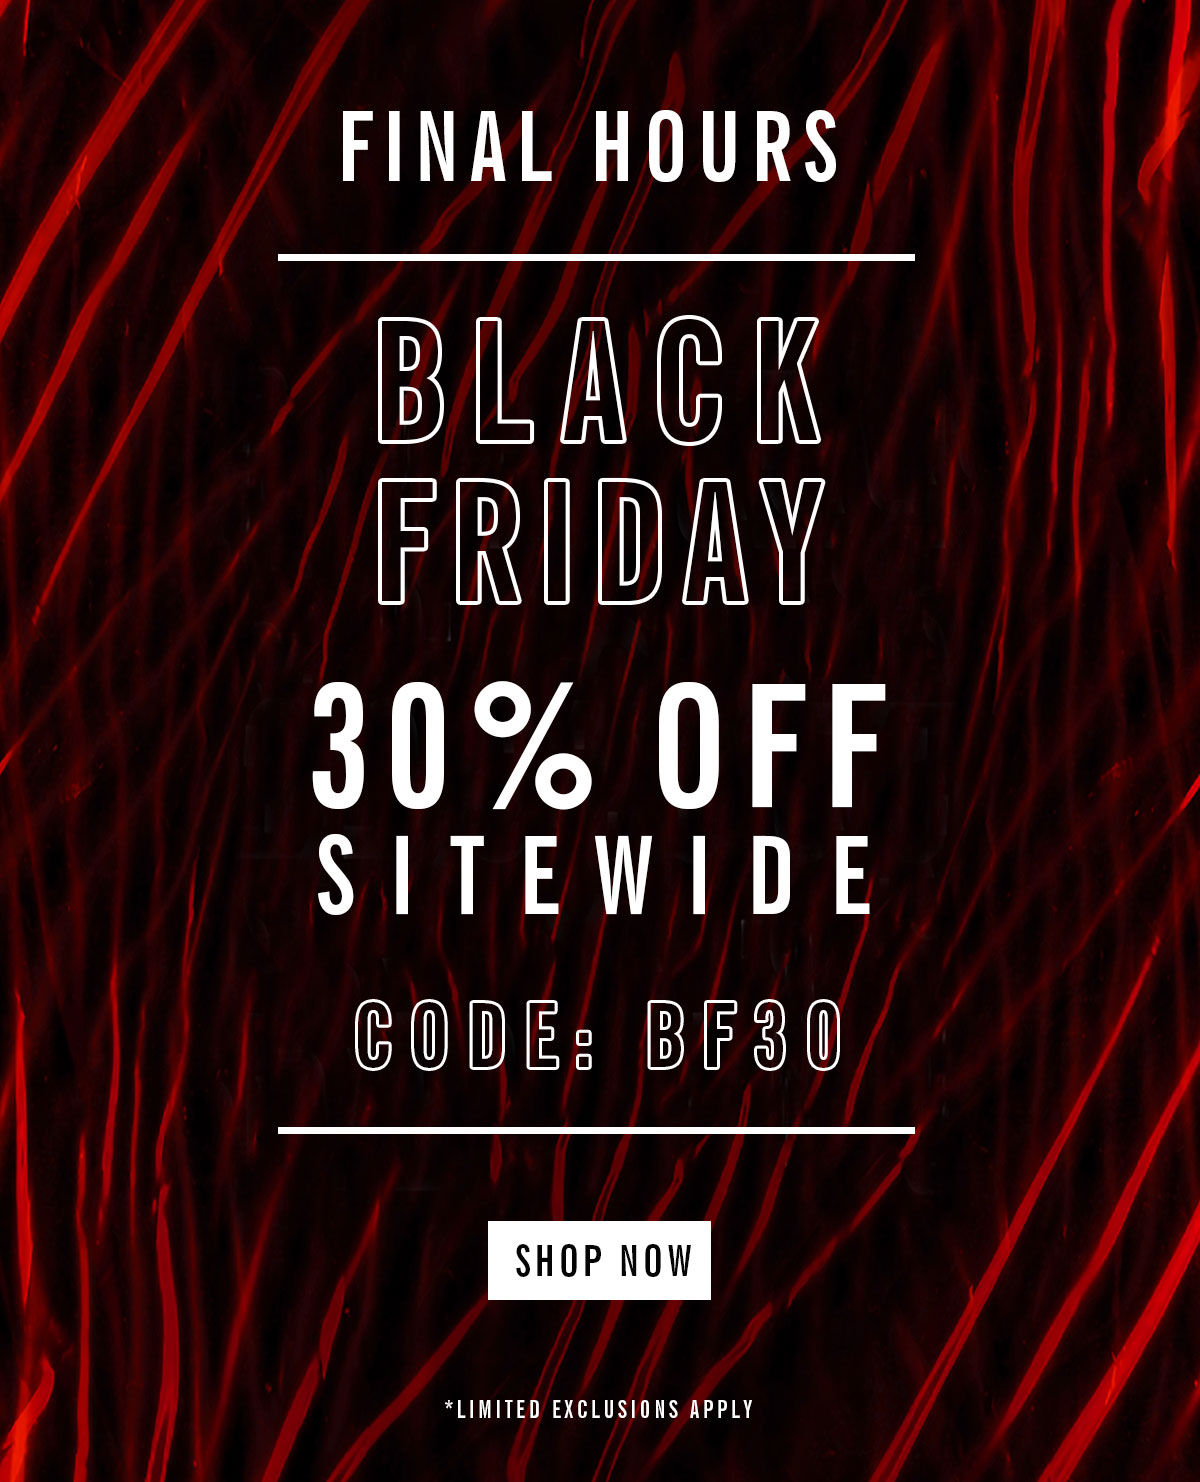 Final Hours | Black Friday | 30% Off Sitewide | Code: BF30 | Shop Now | Limited Exclusions Apply